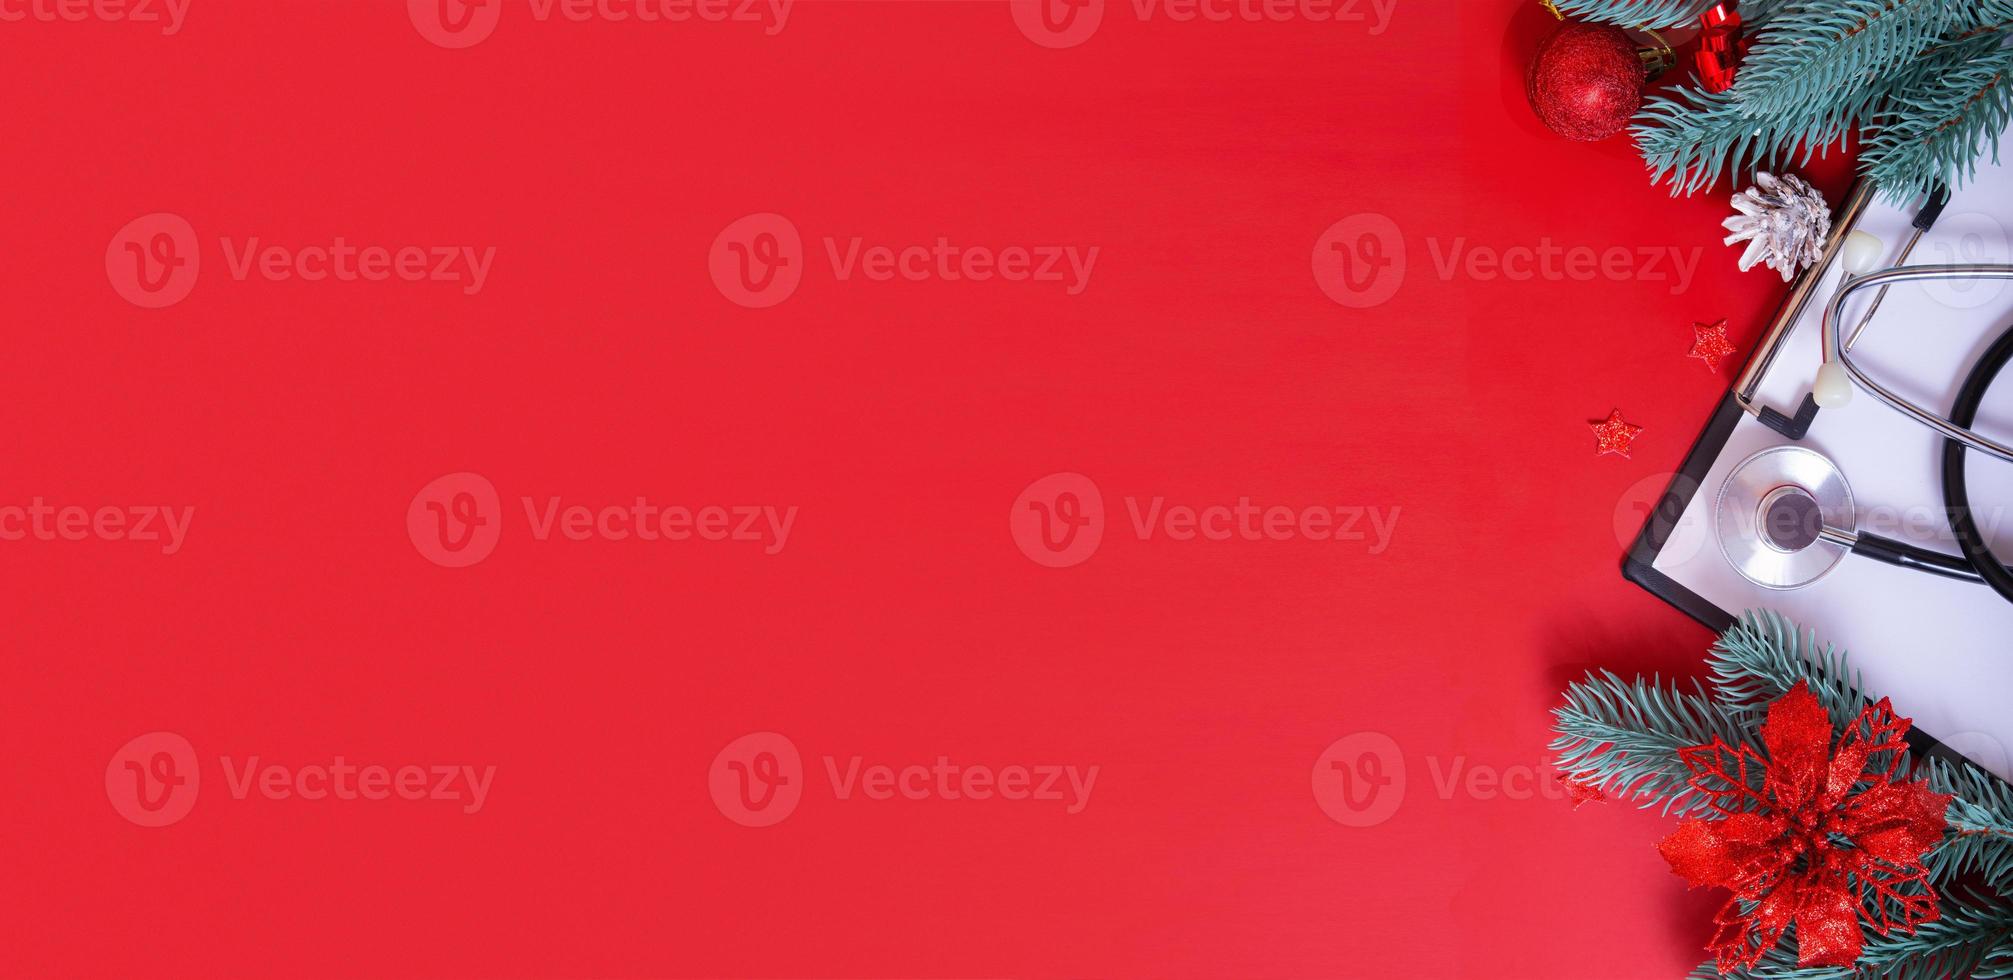 Banner with medical stethoscope and christmas decorations on red background with copy space photo